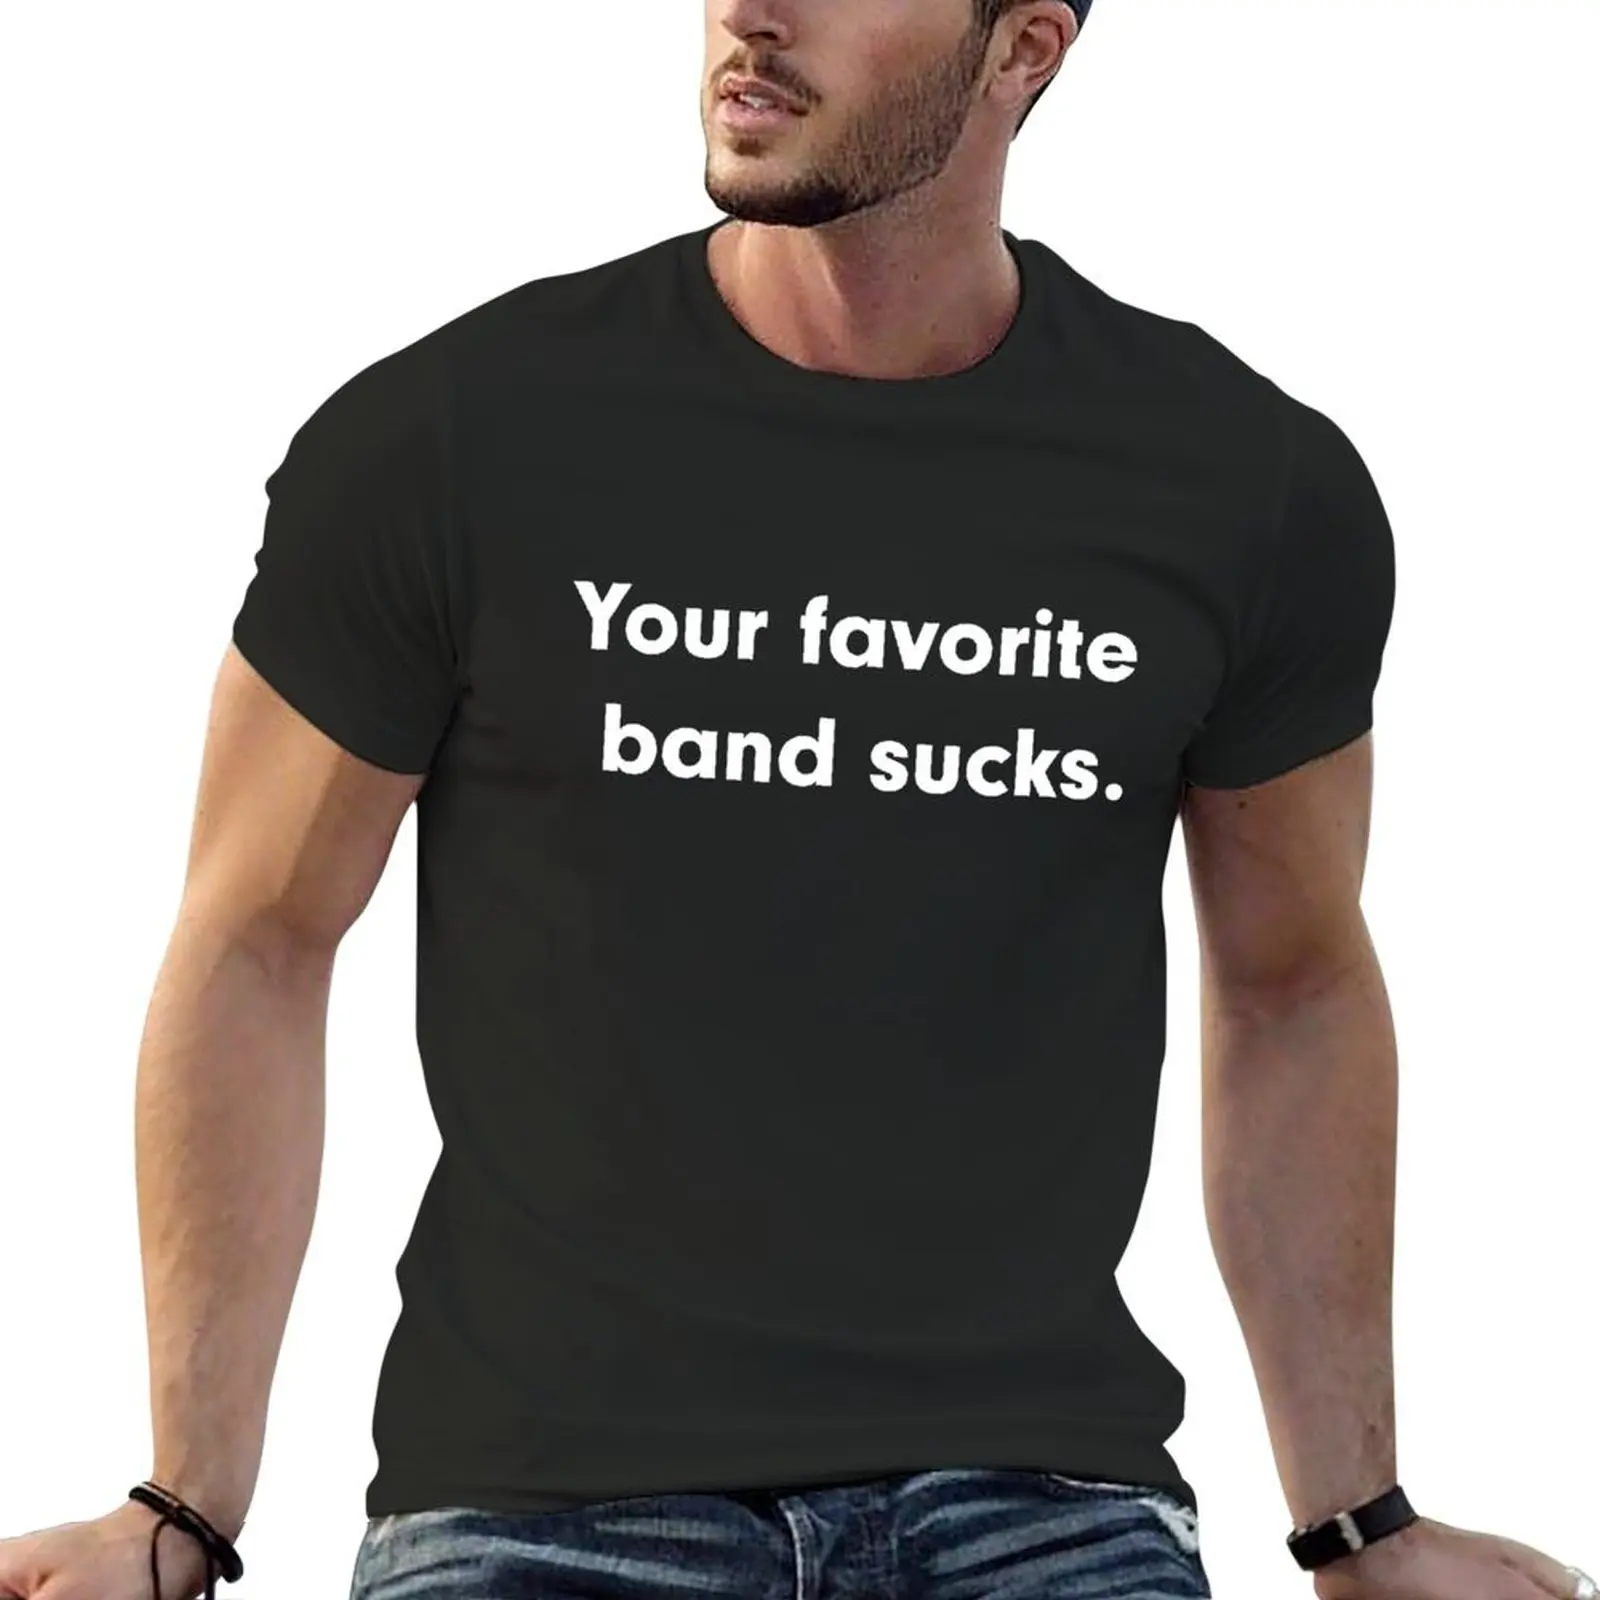 

Your Favorite band sucks Funny Sarcastic T-shirt sports fans new edition aesthetic clothes summer top designer t shirt men